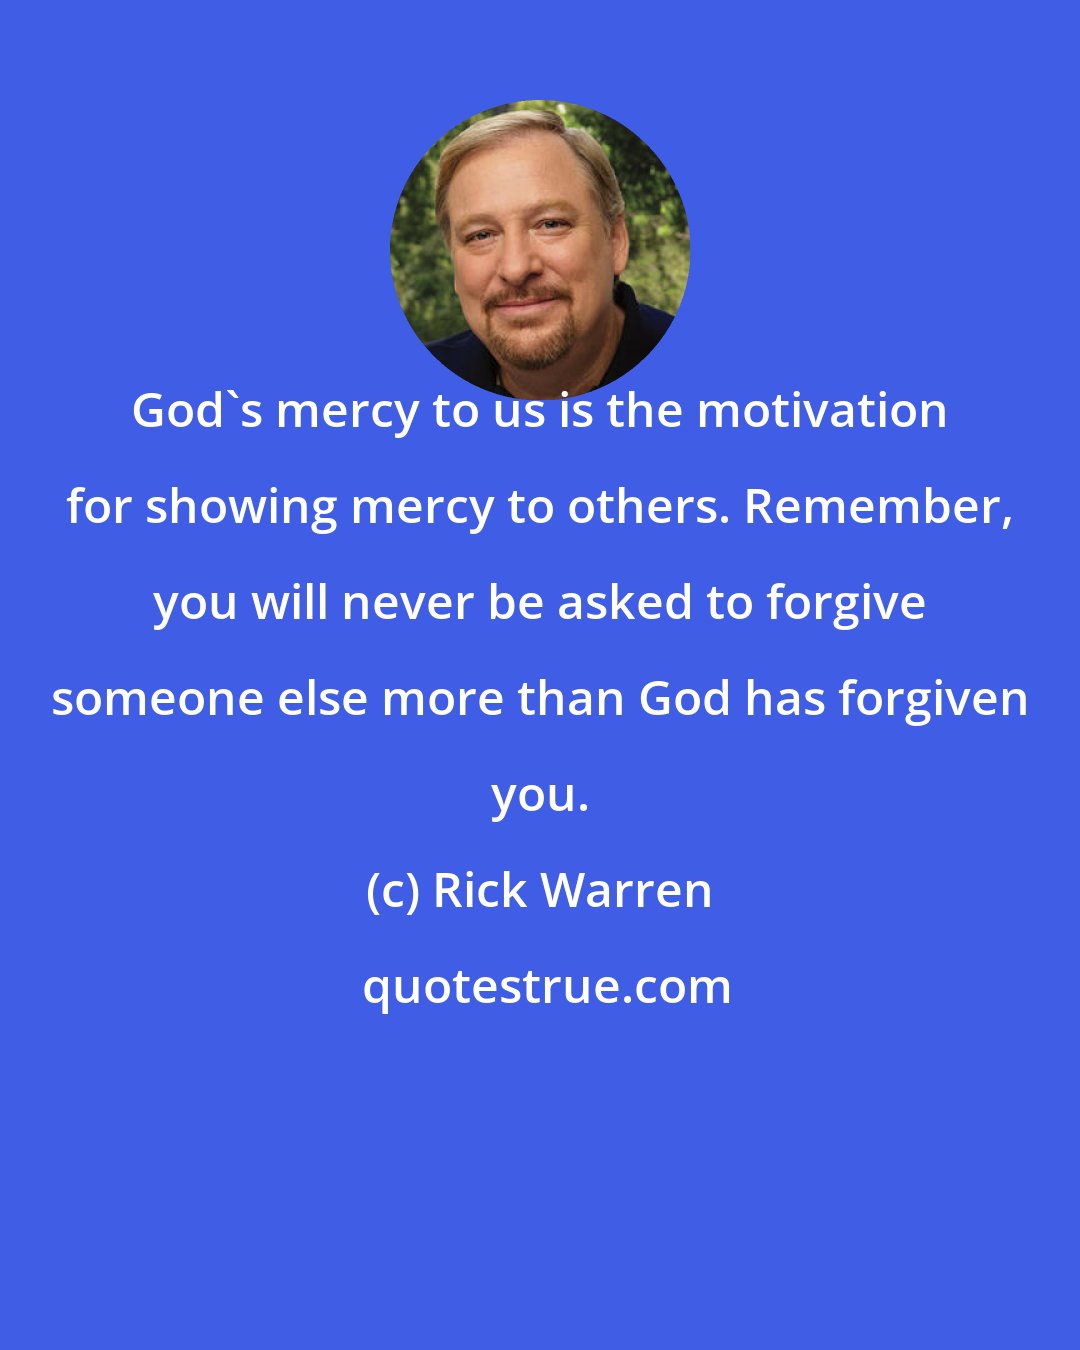 Rick Warren: God's mercy to us is the motivation for showing mercy to others. Remember, you will never be asked to forgive someone else more than God has forgiven you.